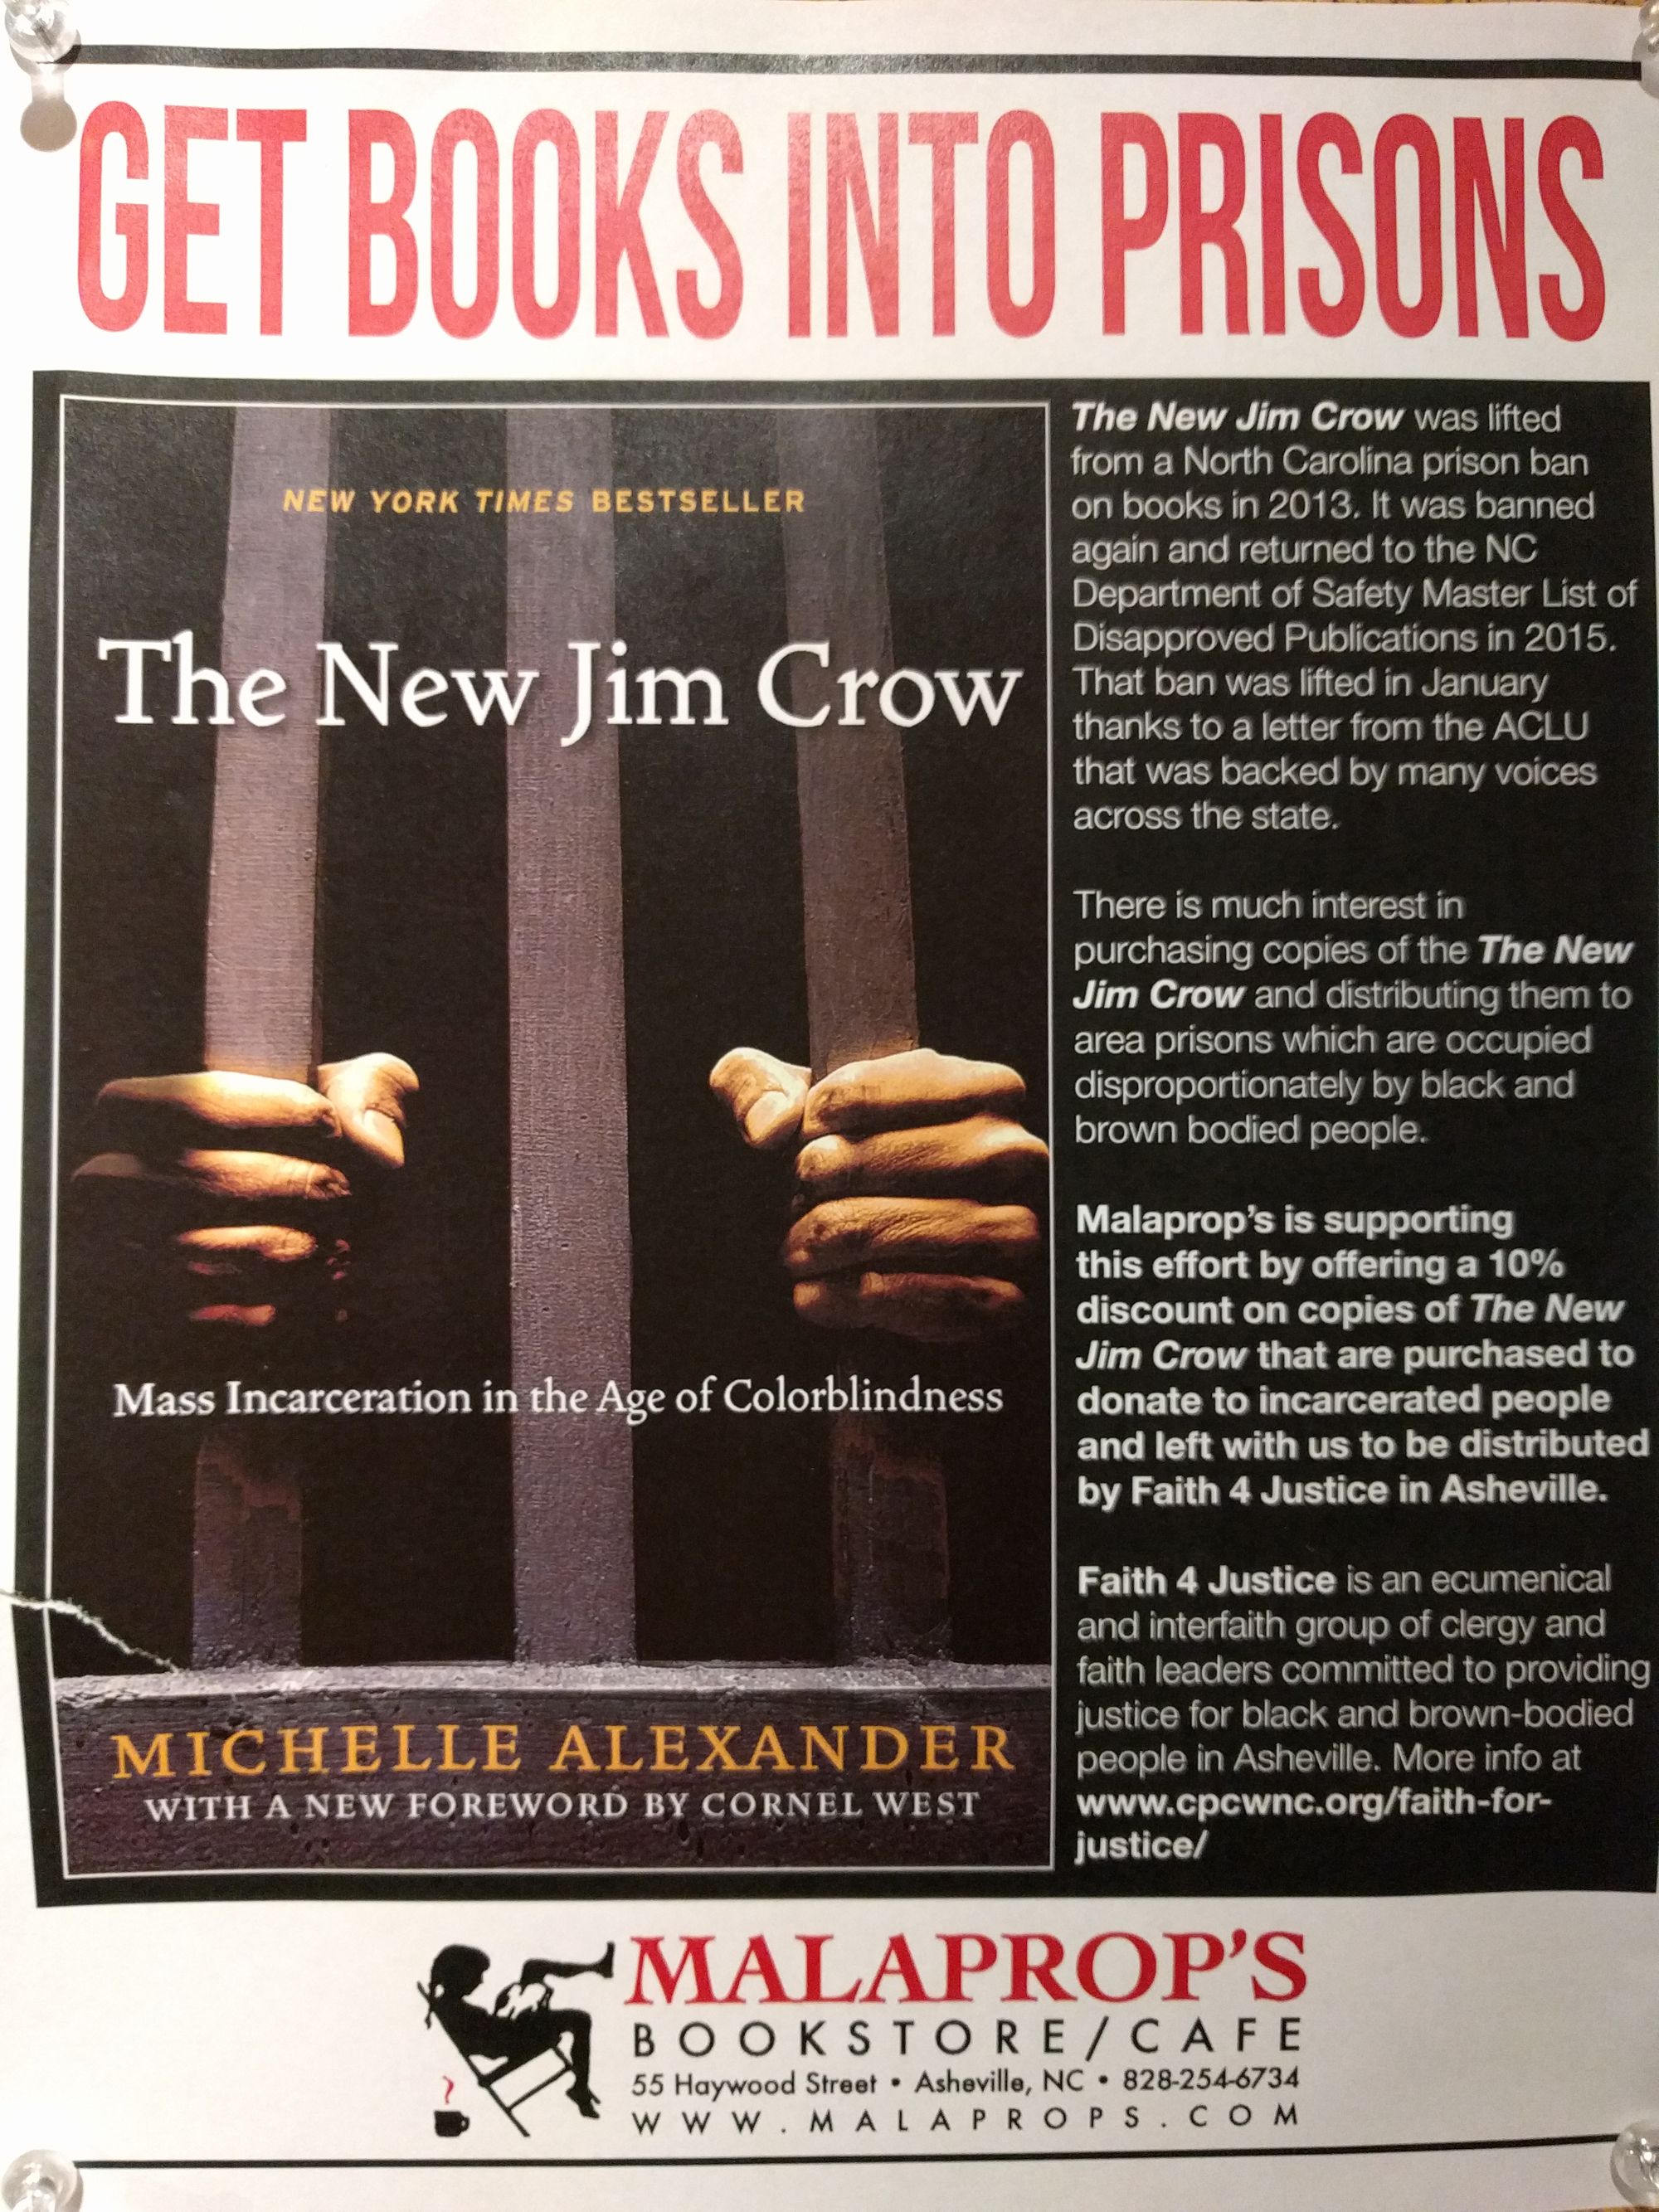 New Jim Crow on its way into NC prisons!